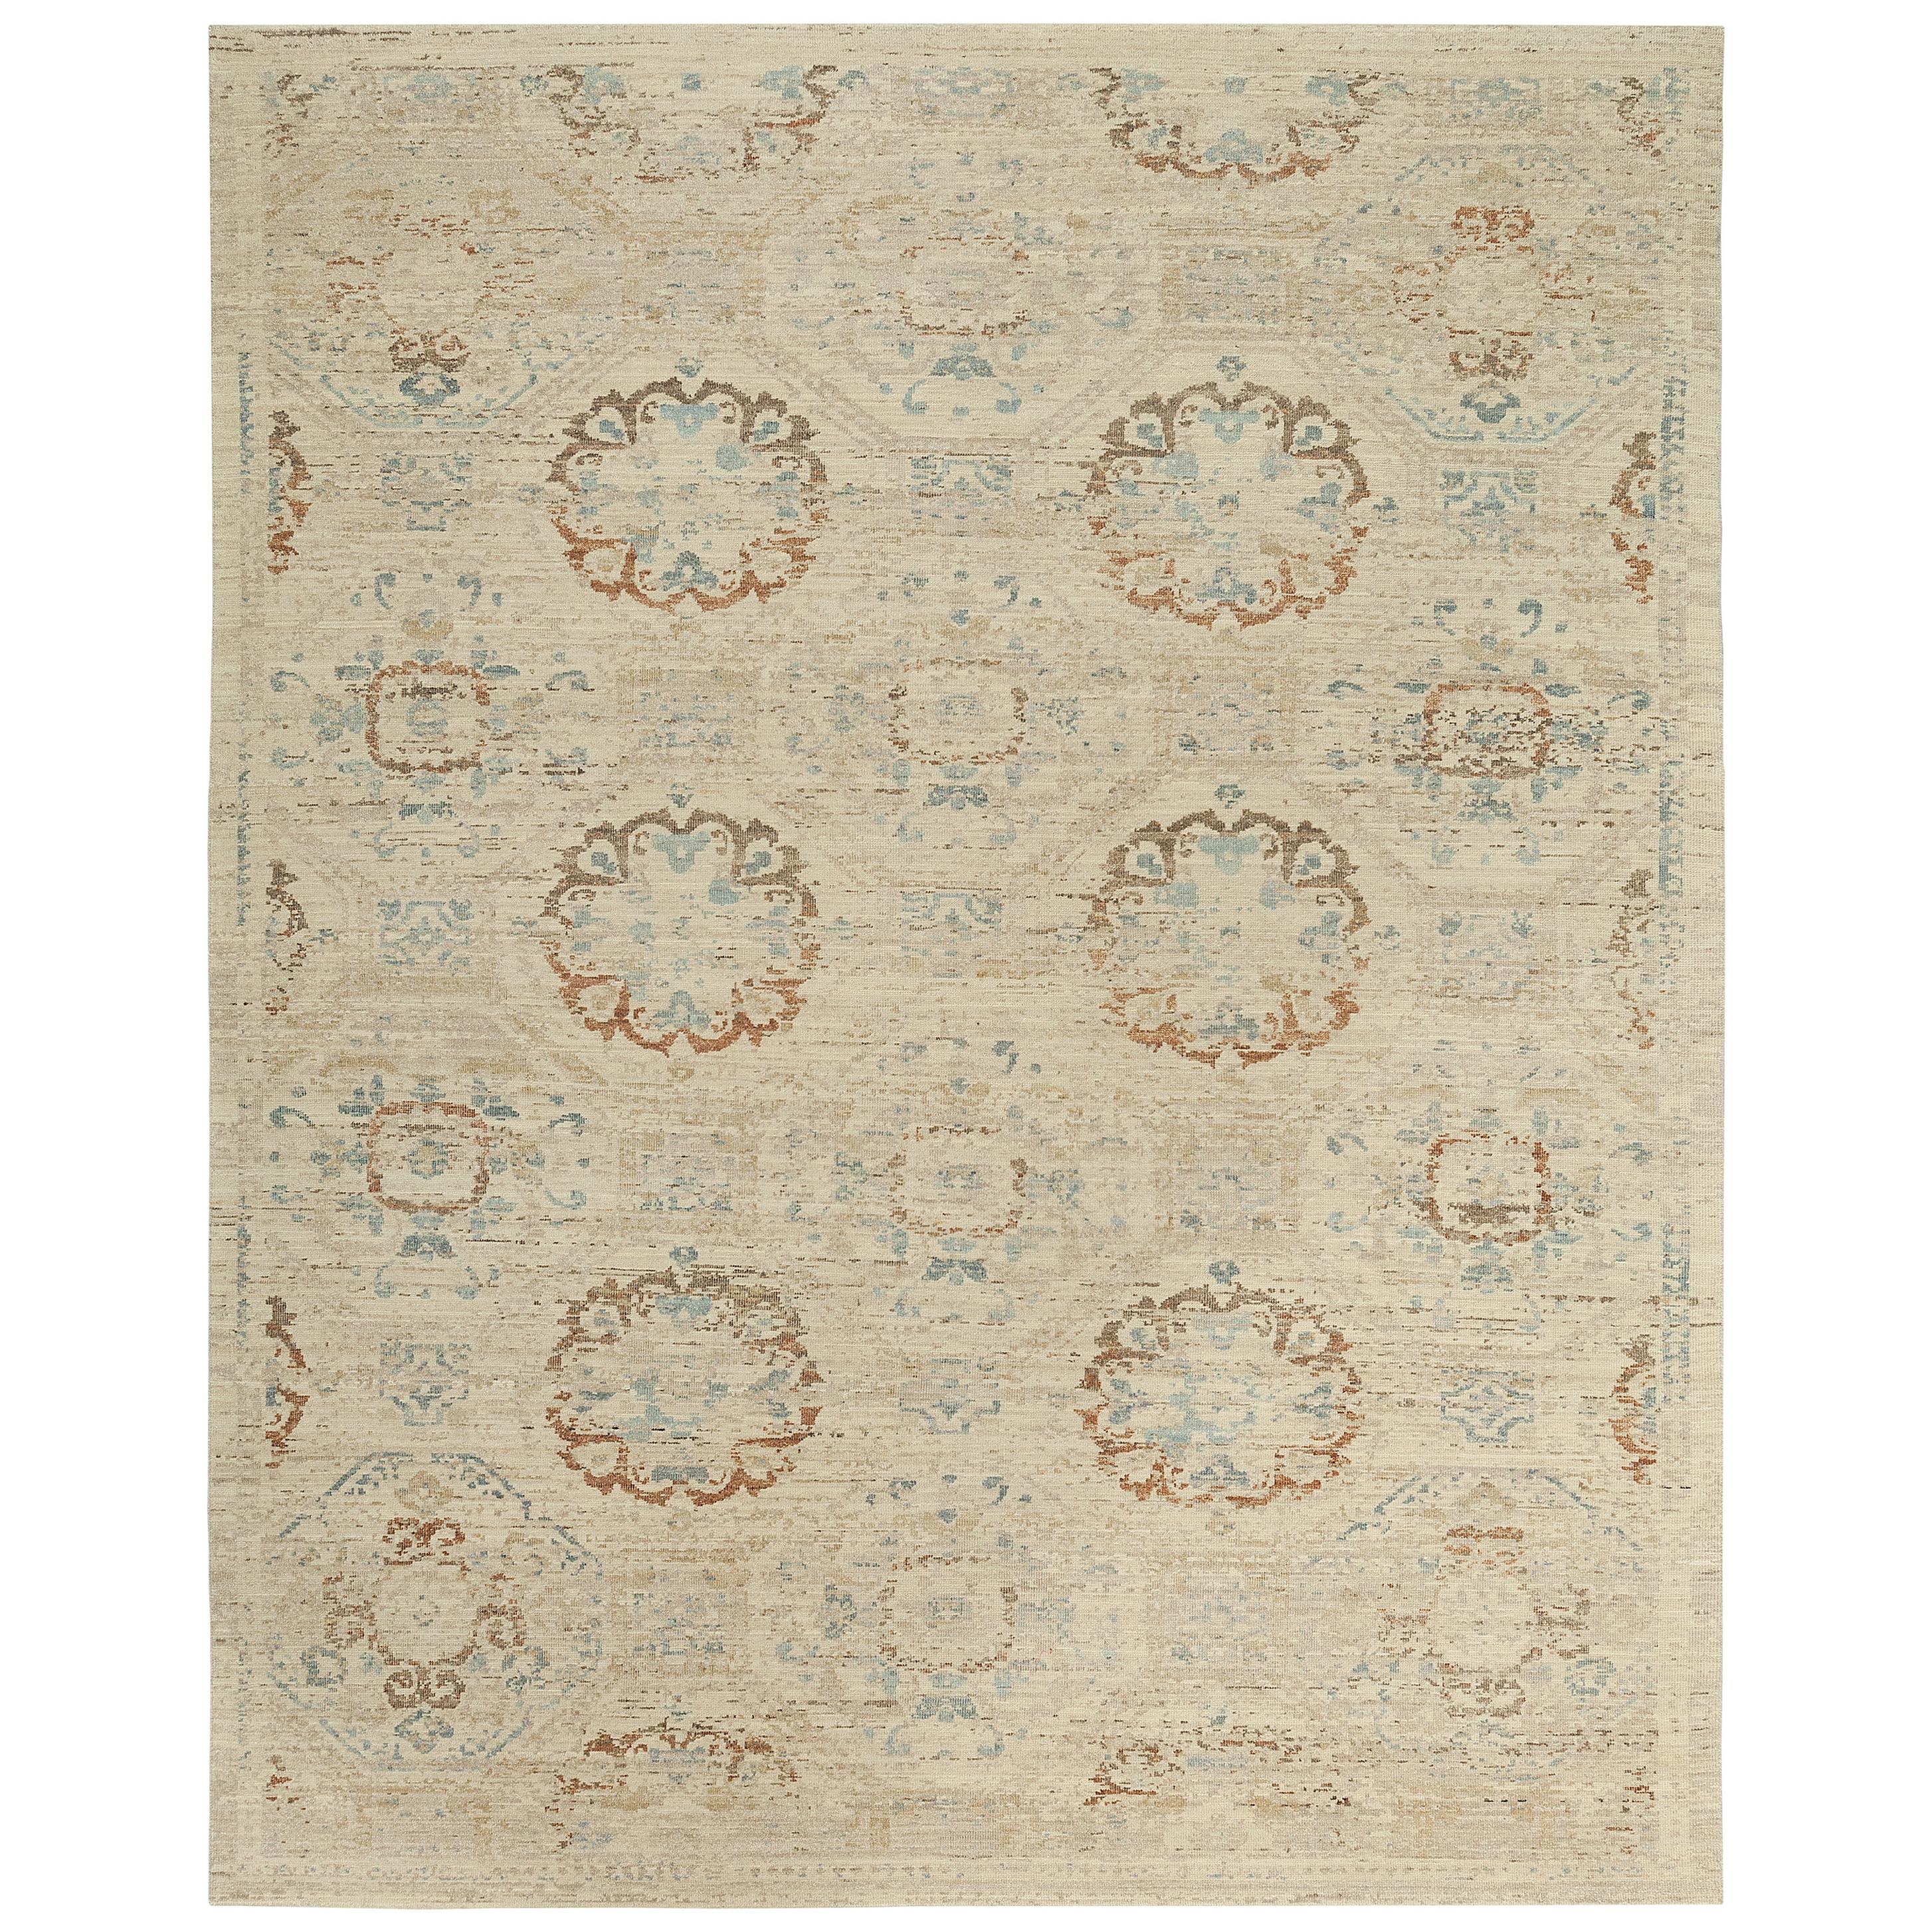 Nazmiyal Collection Geometric Beige Rust Modern Boutique Rug 10 ft x 14 ft